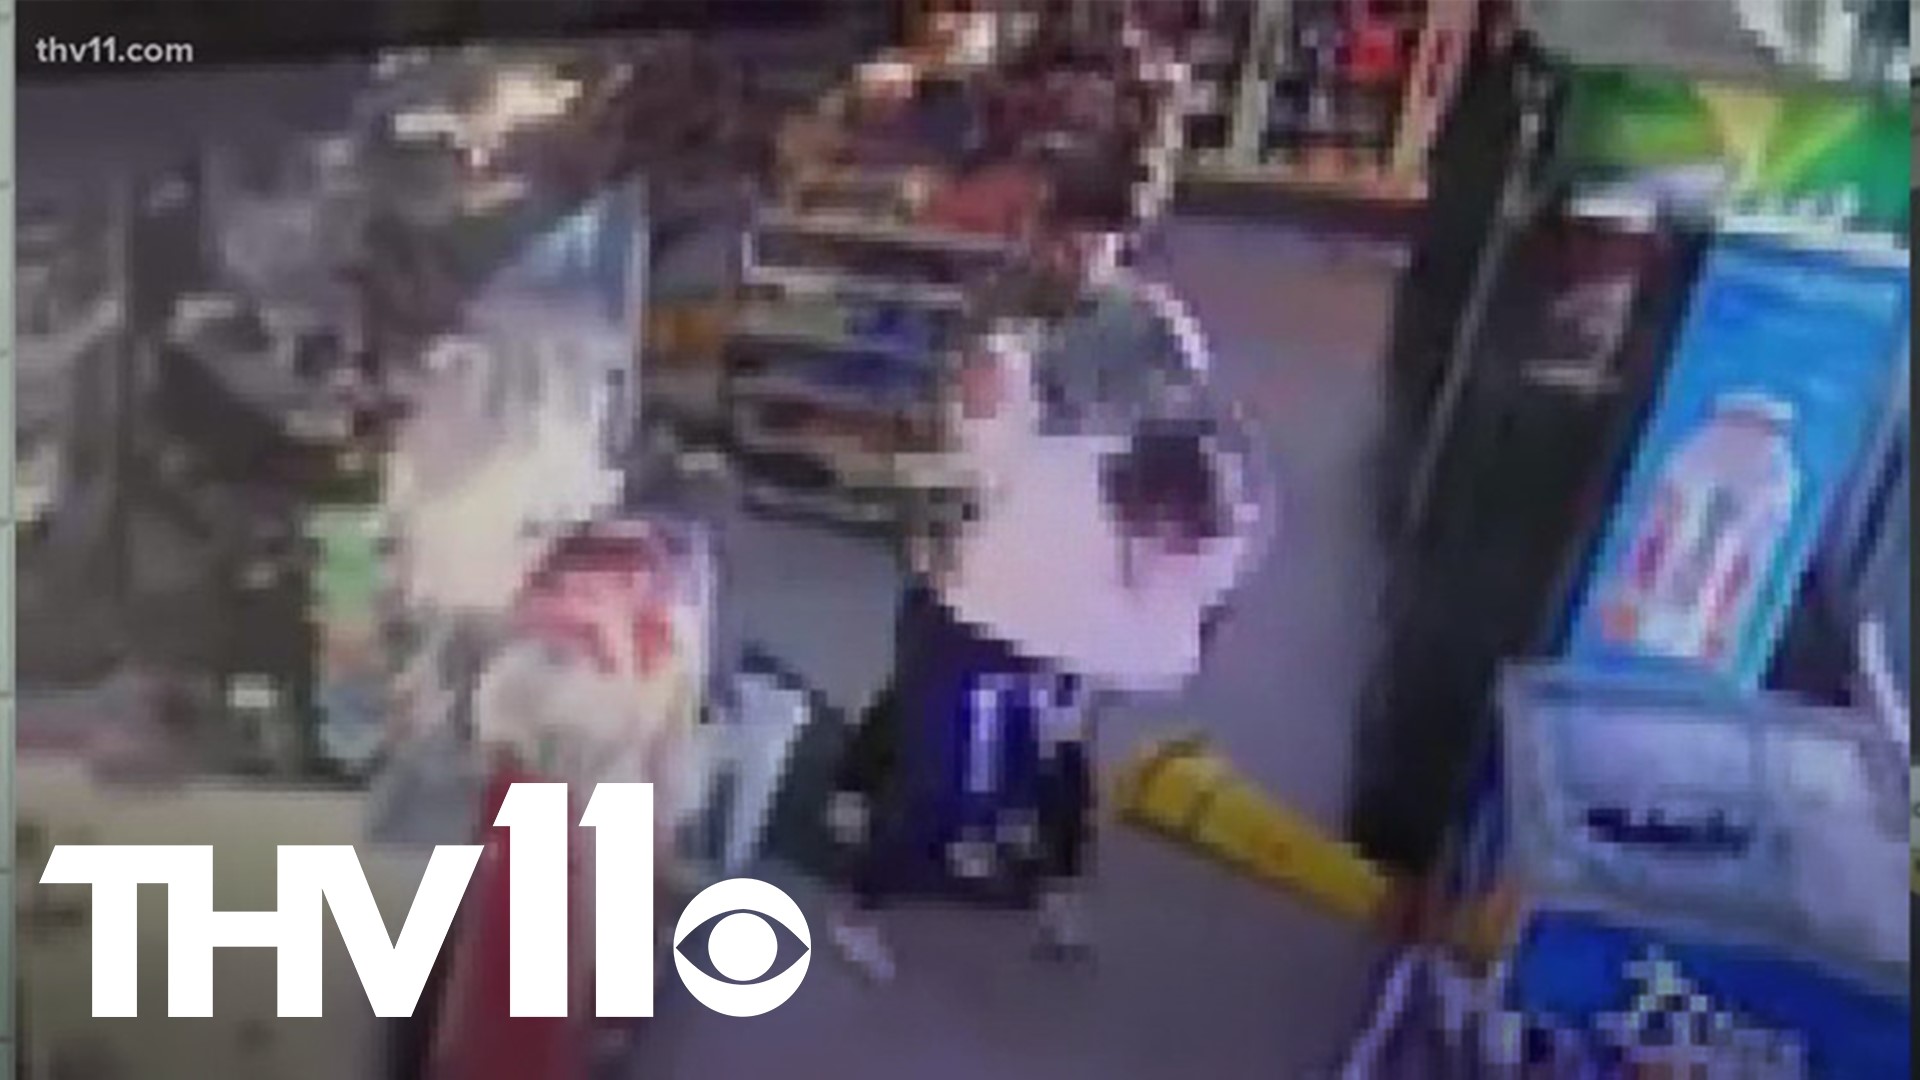 Pine Bluff residents demand answers after baseball bat fight in gas station thv11